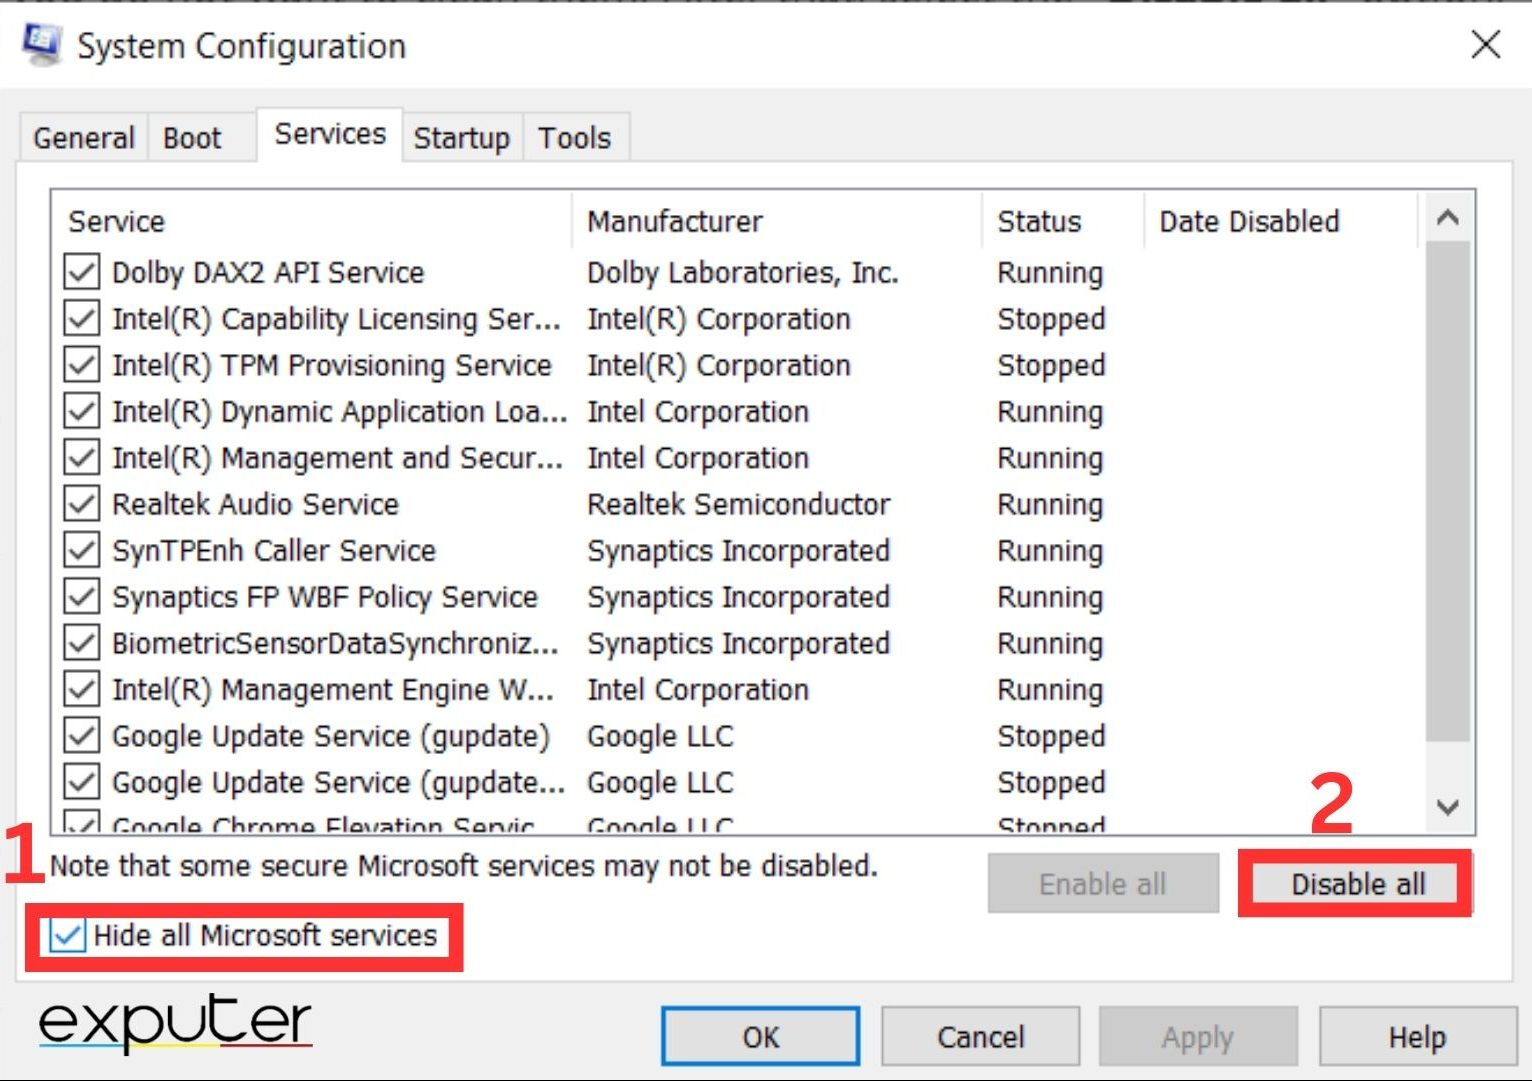 Disable all services other than Microsoft services